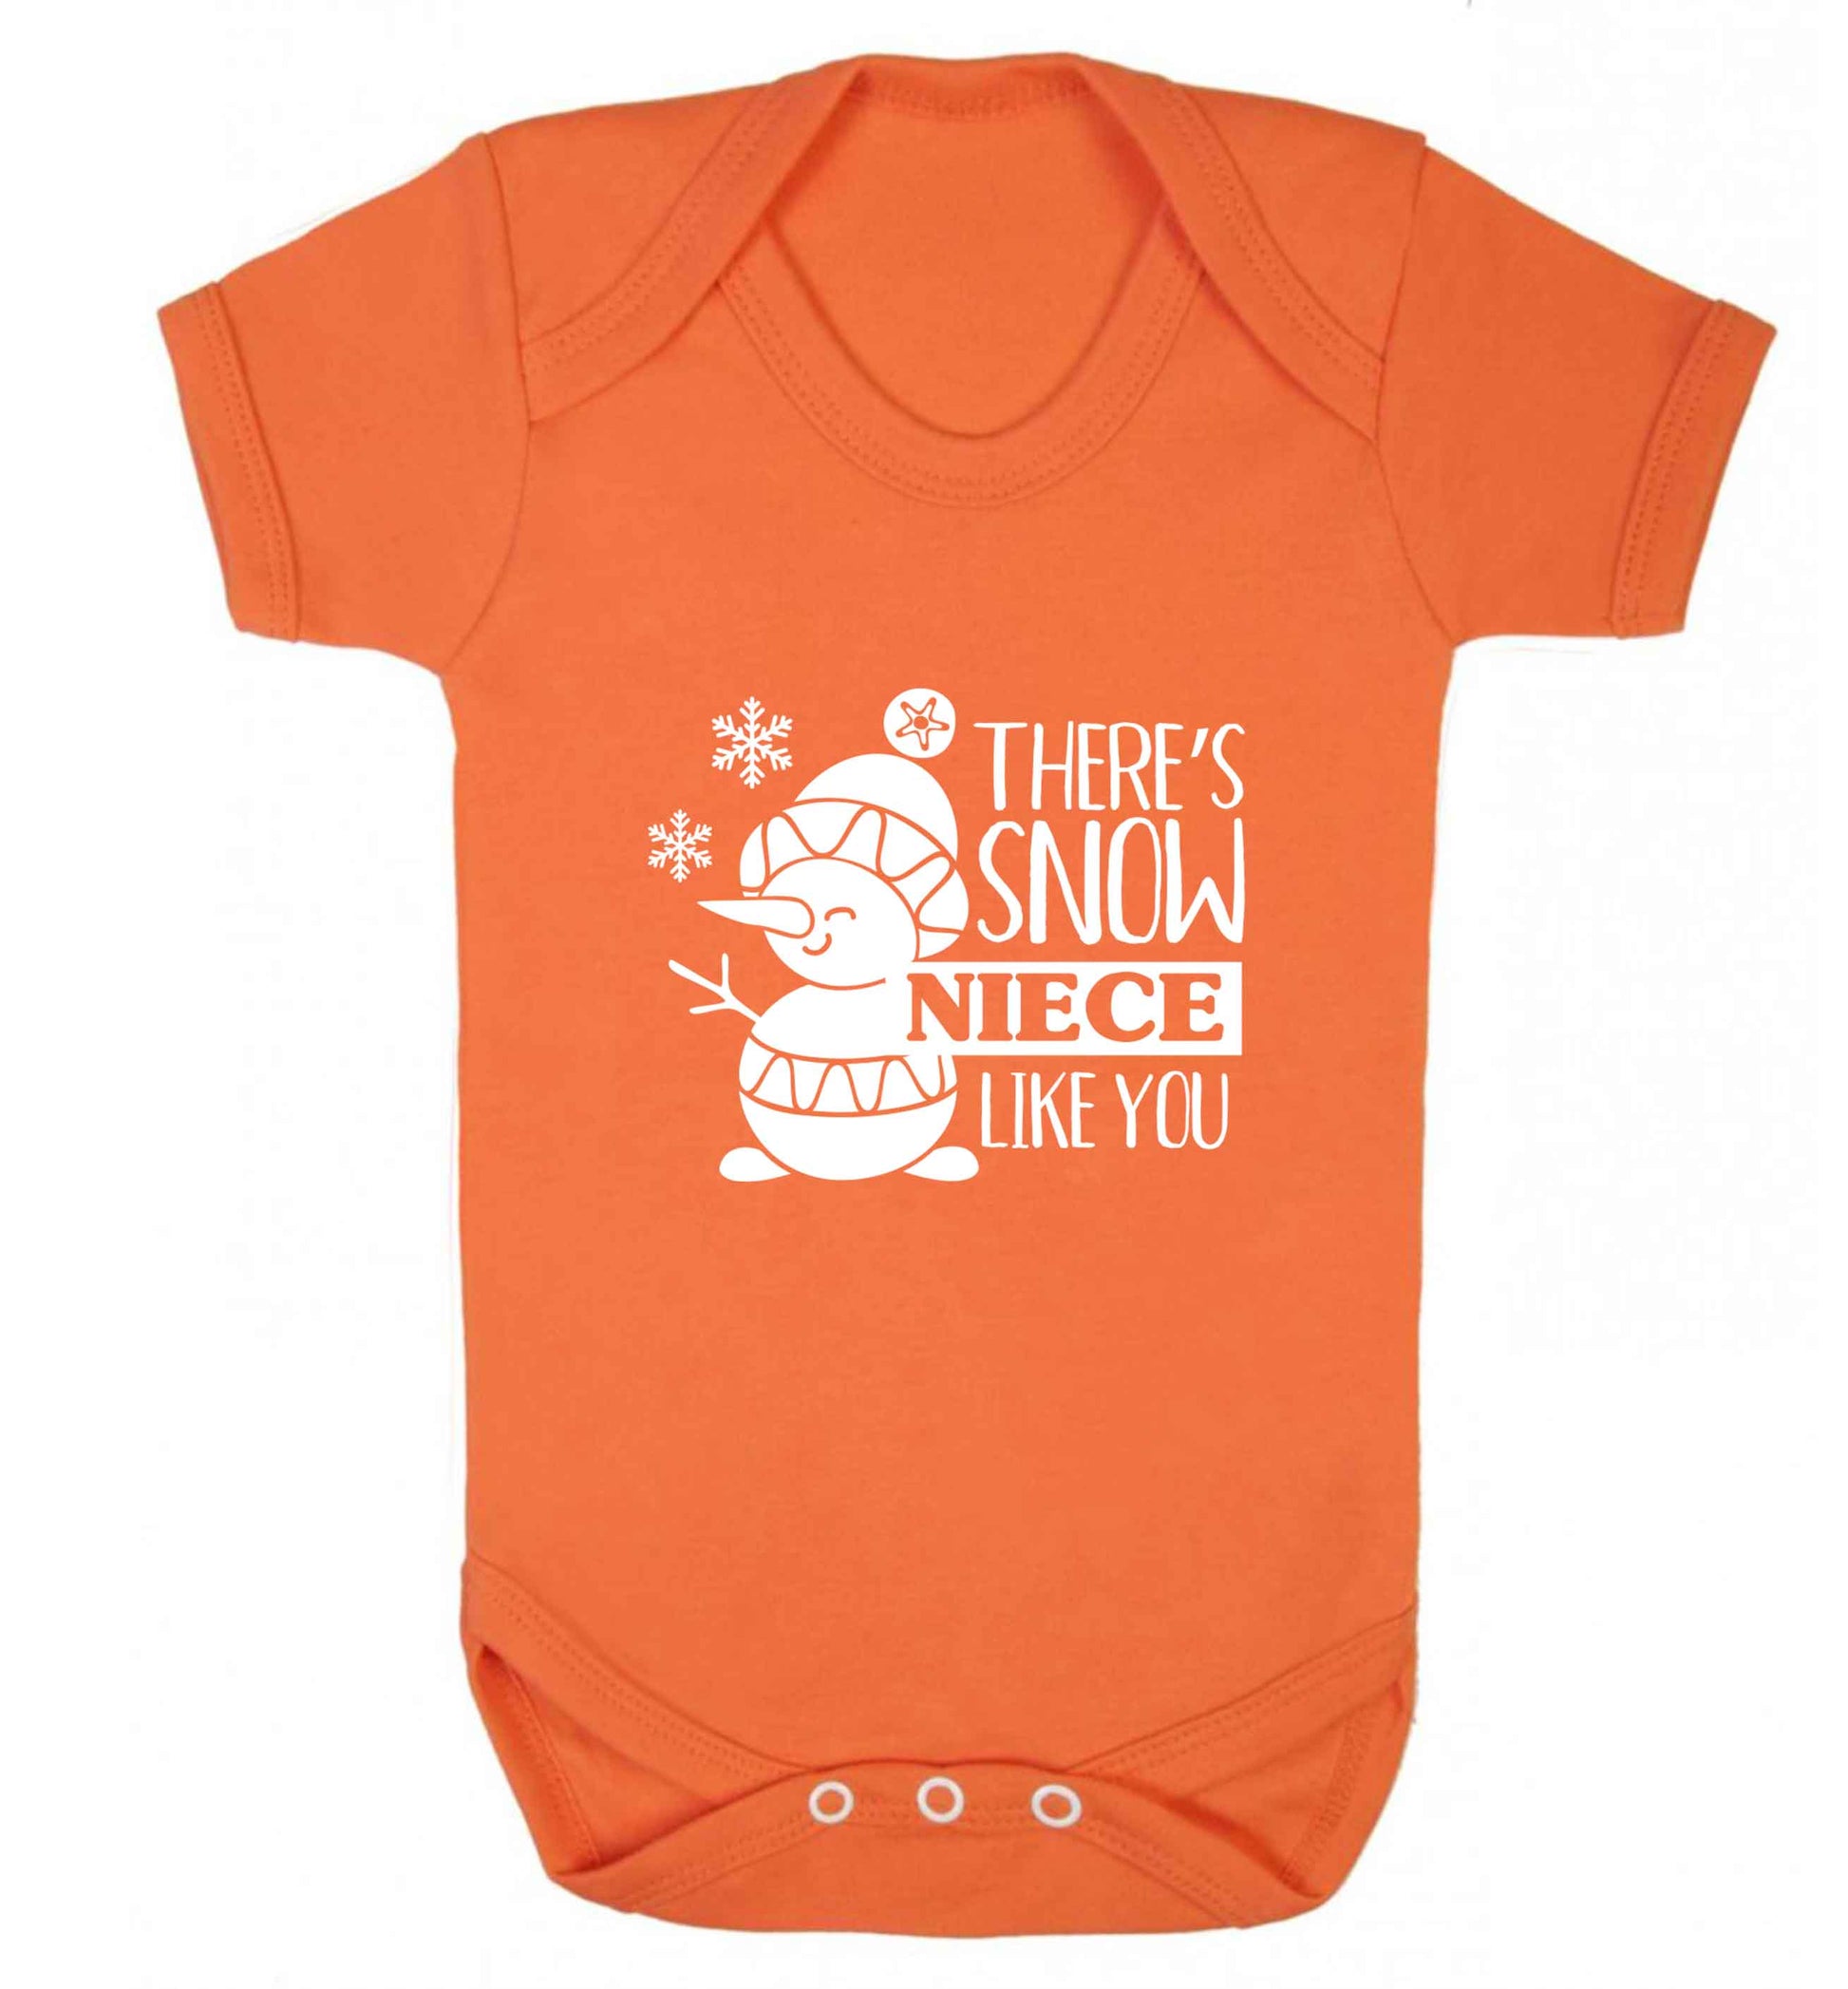 There's snow niece like you baby vest orange 18-24 months